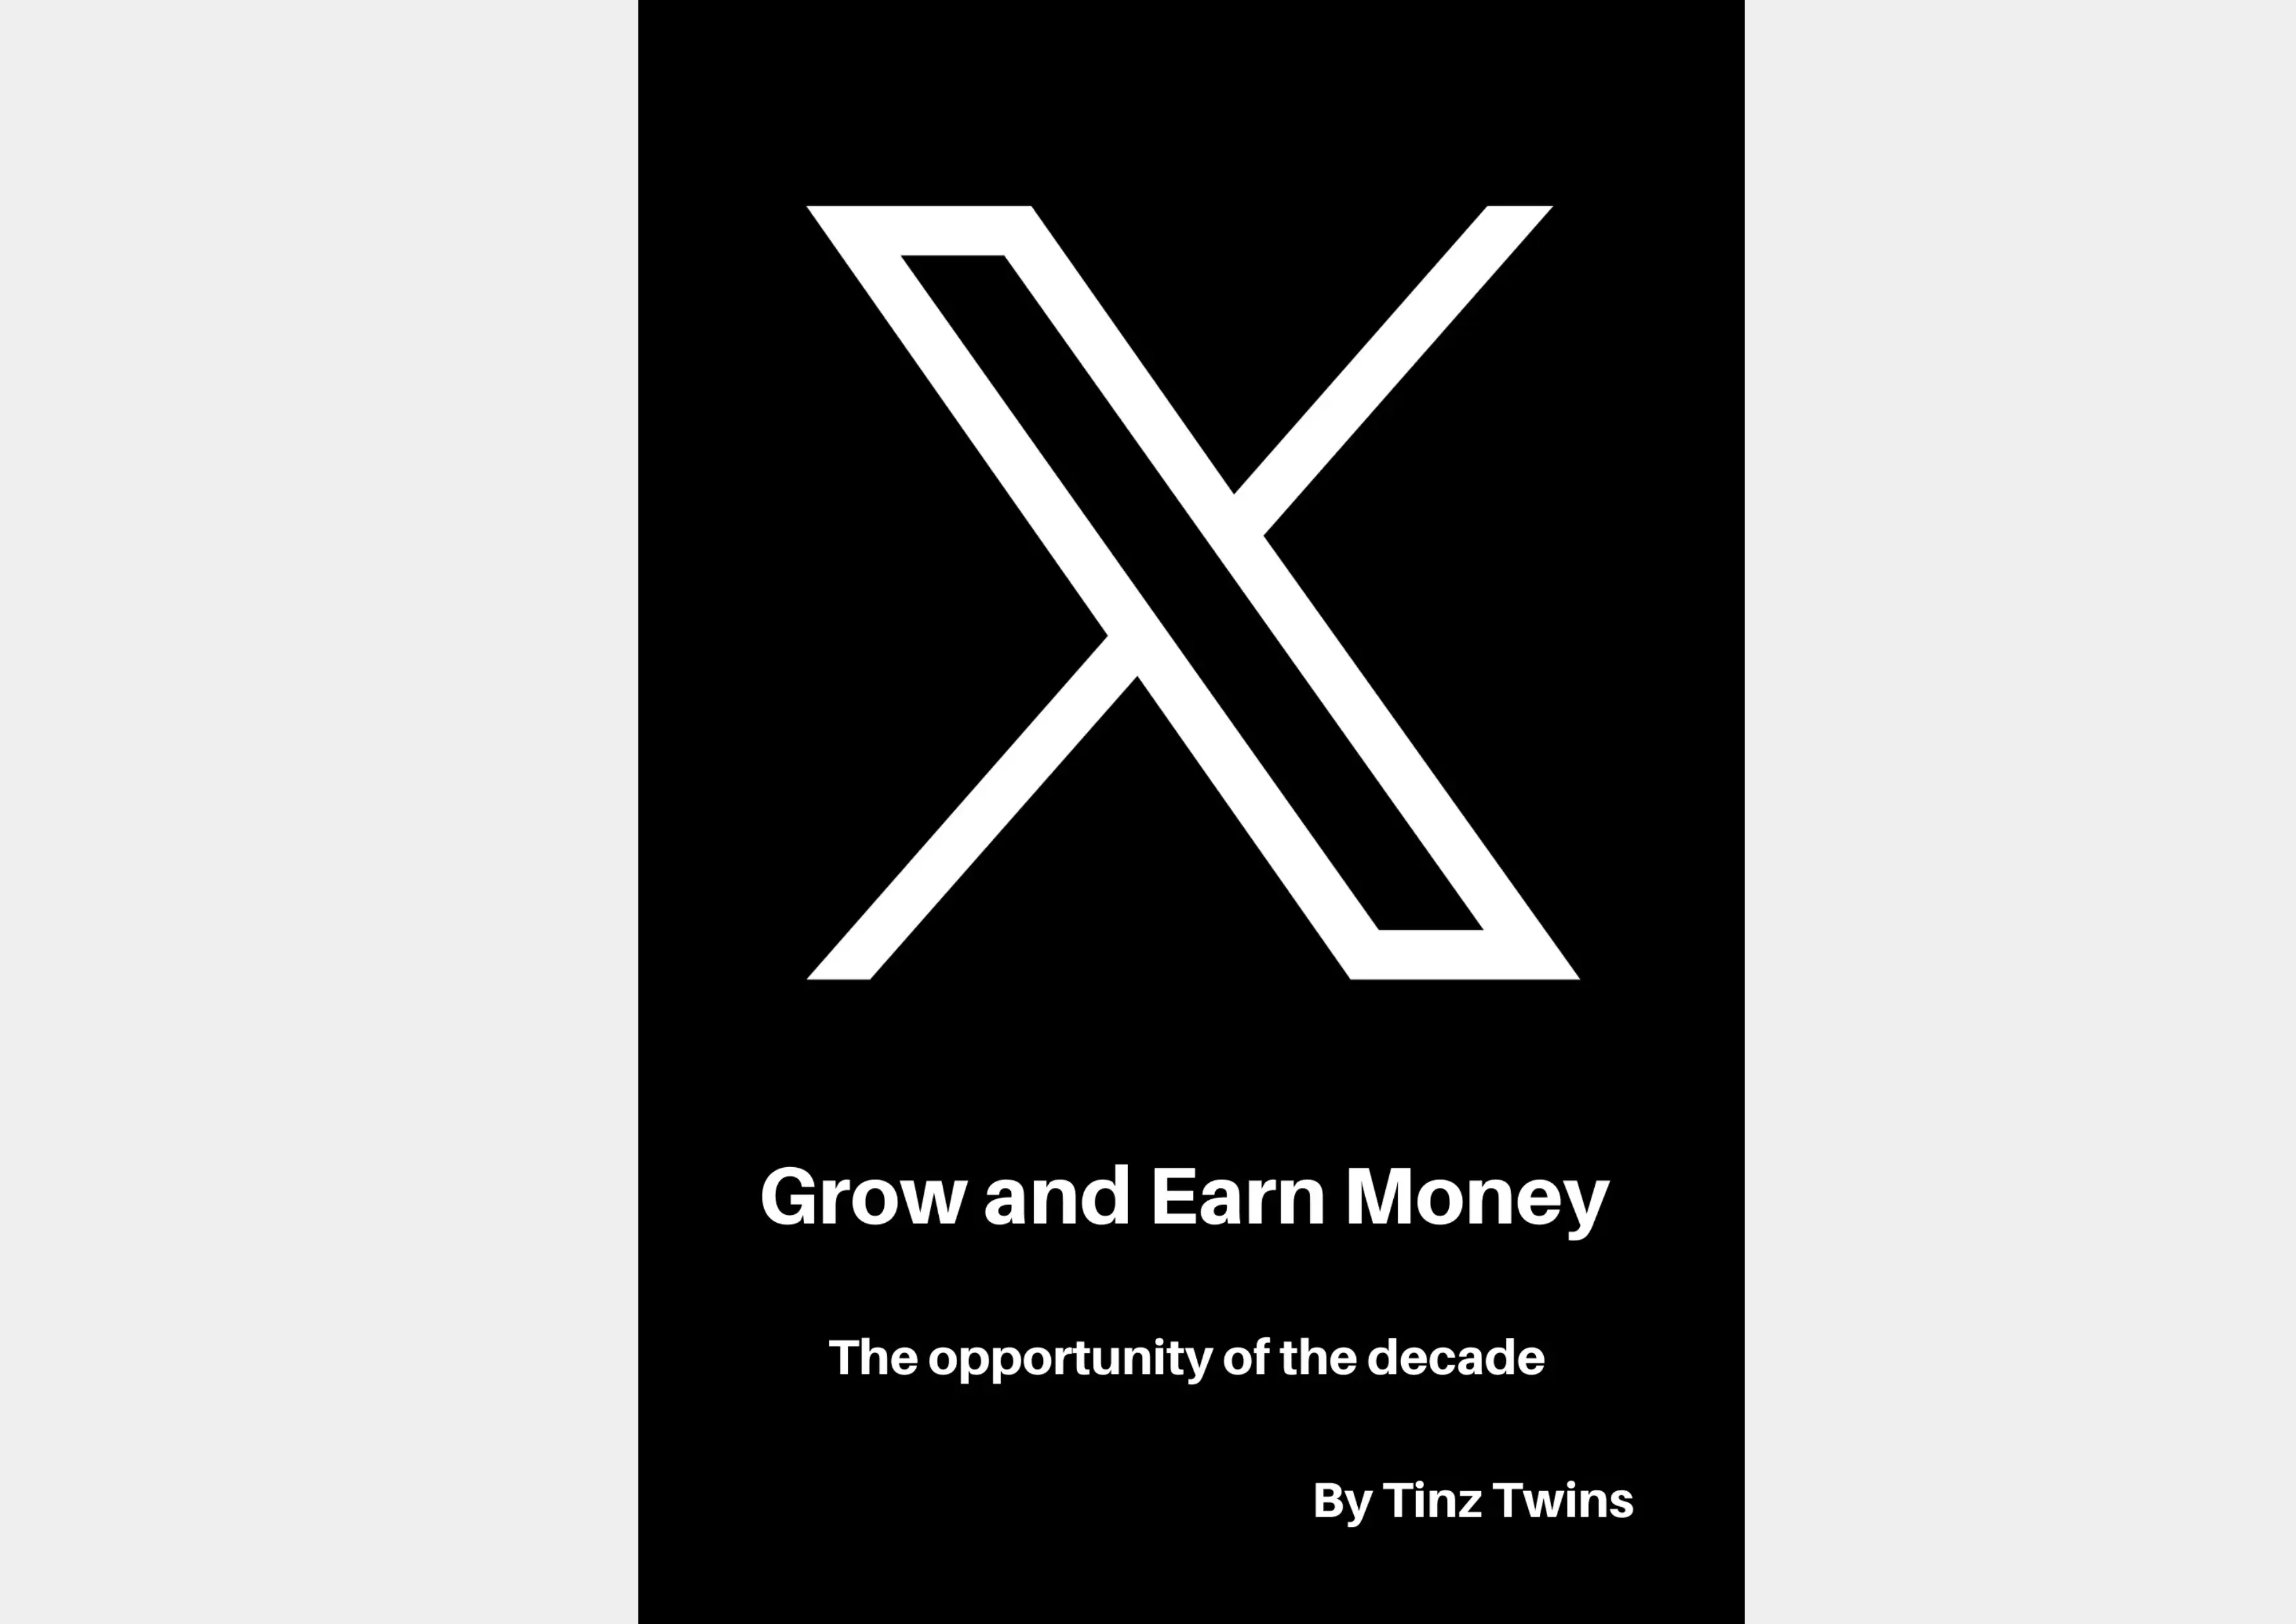 X: Grow and Earn Money - The opportunity of the decade